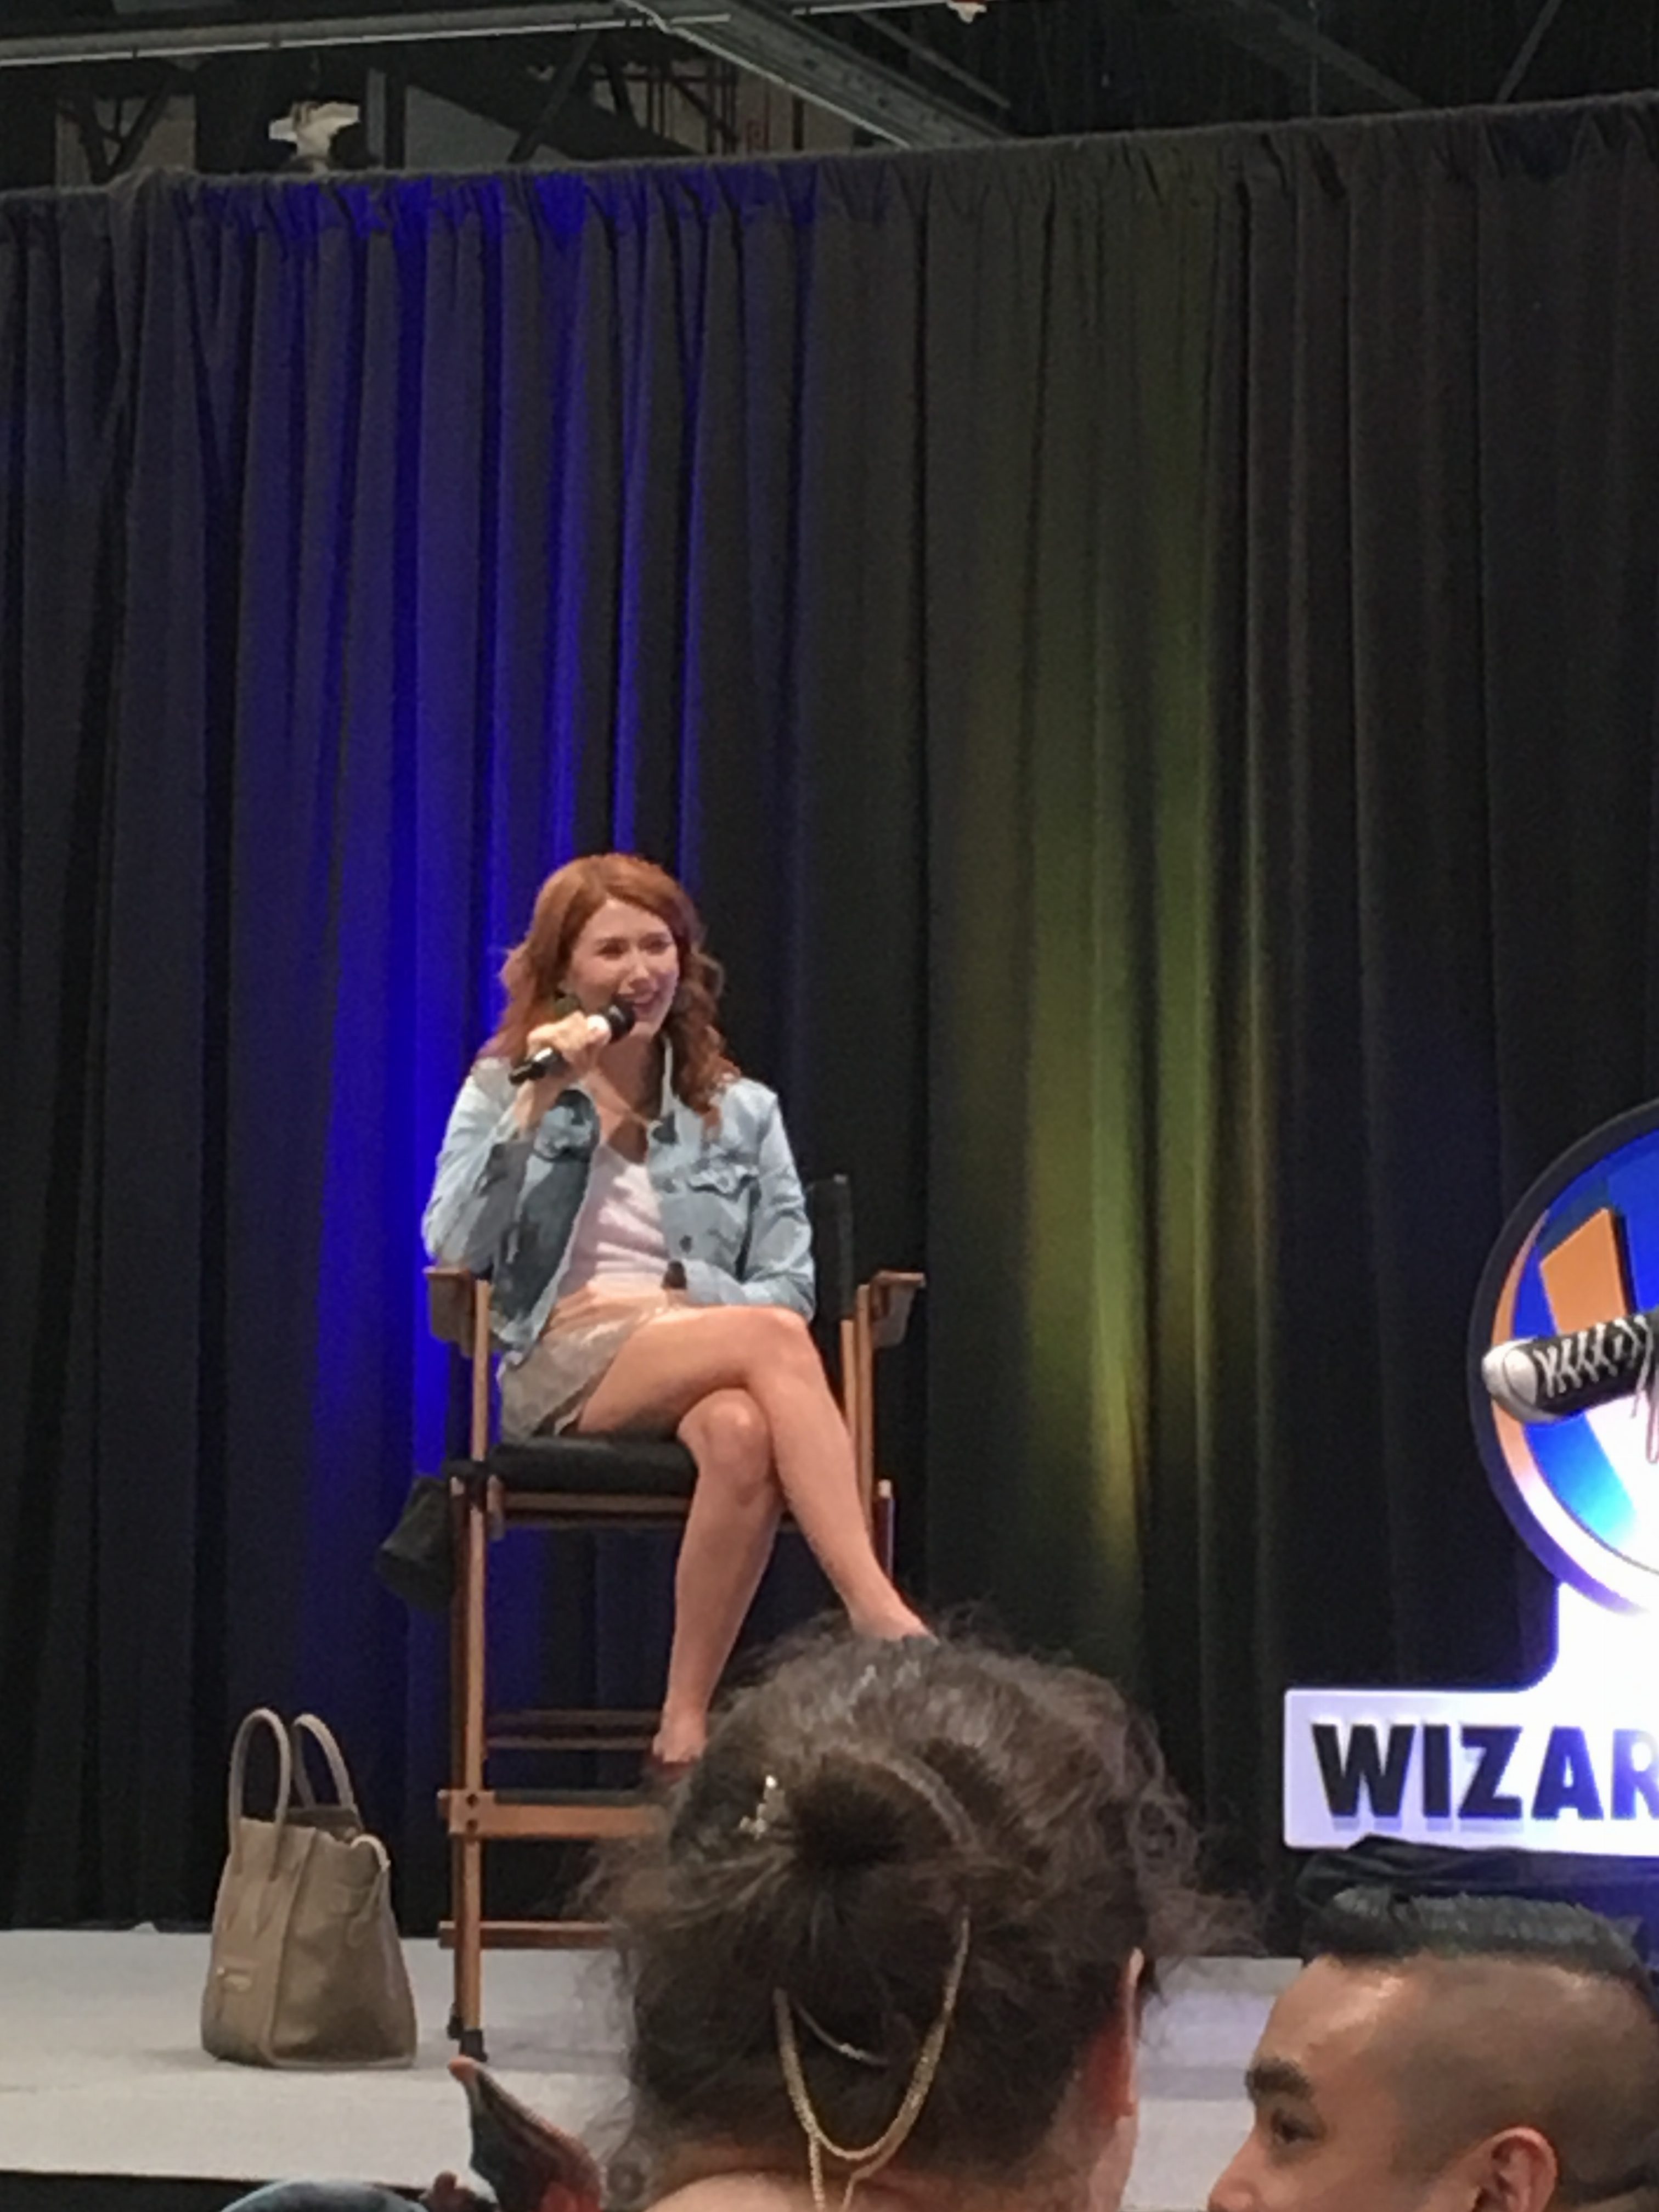 Jewel Staite enjoys her time up on stage